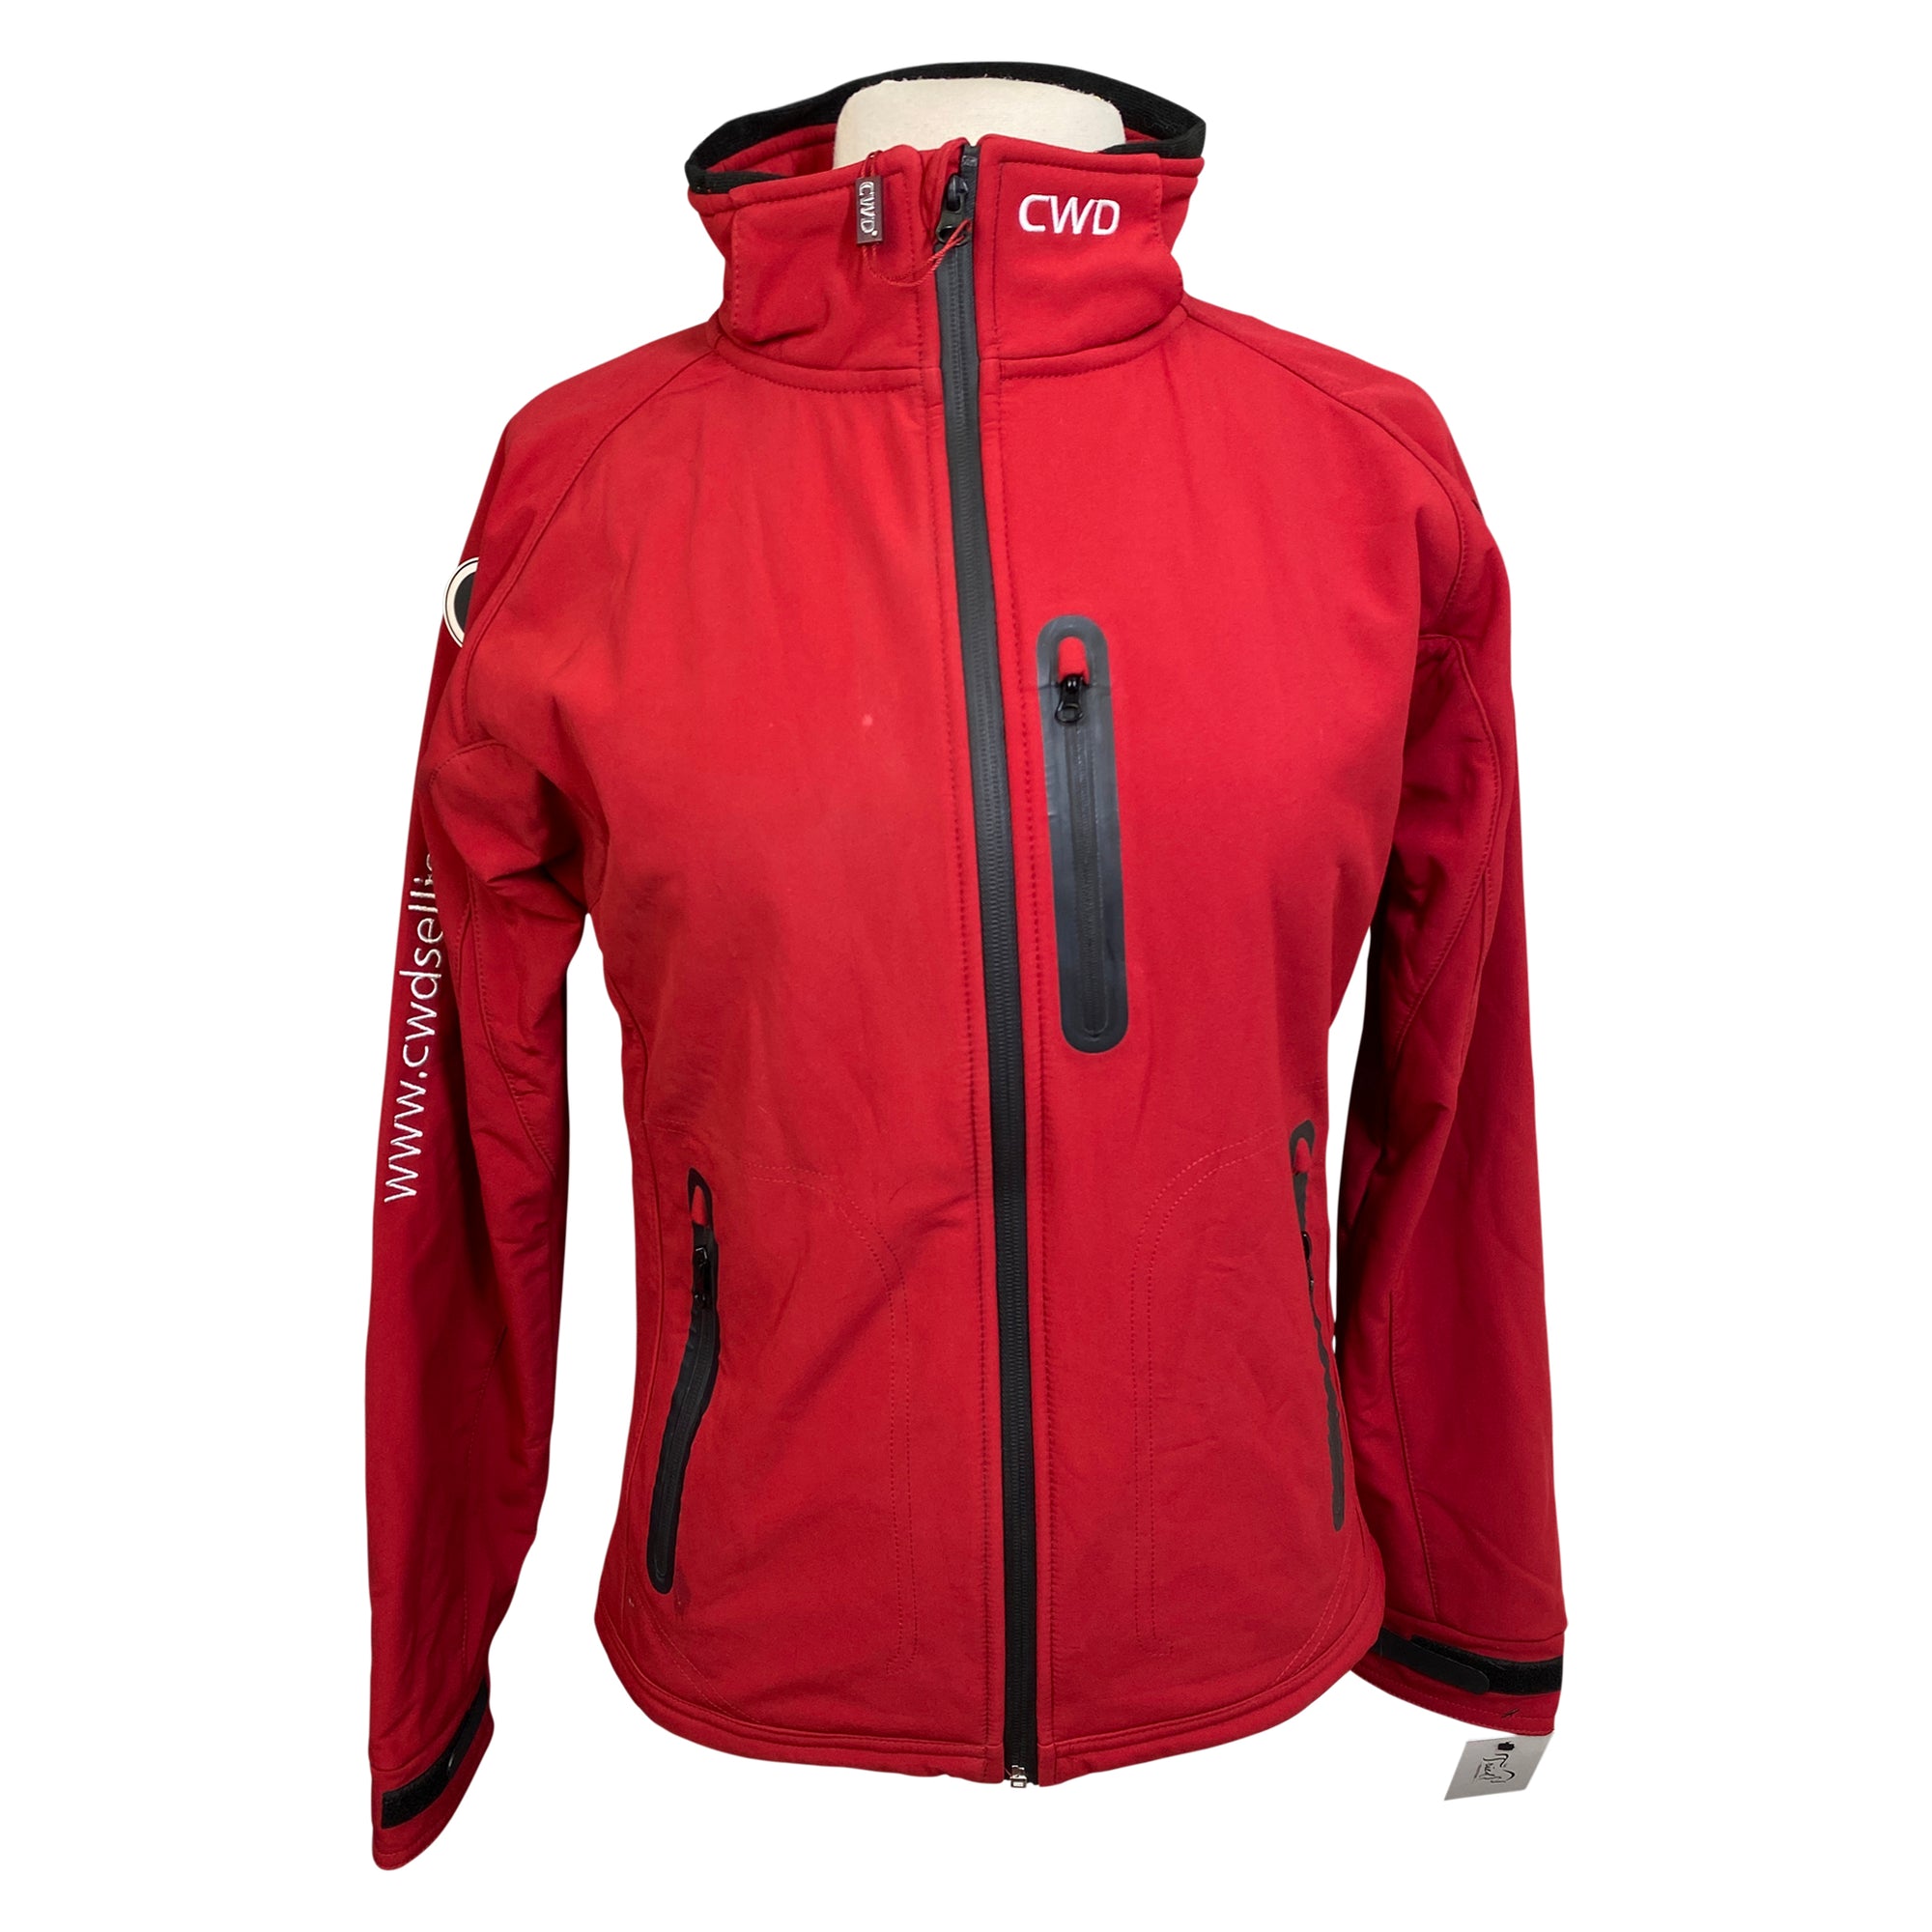 CWD Softshell Jacket in Red 